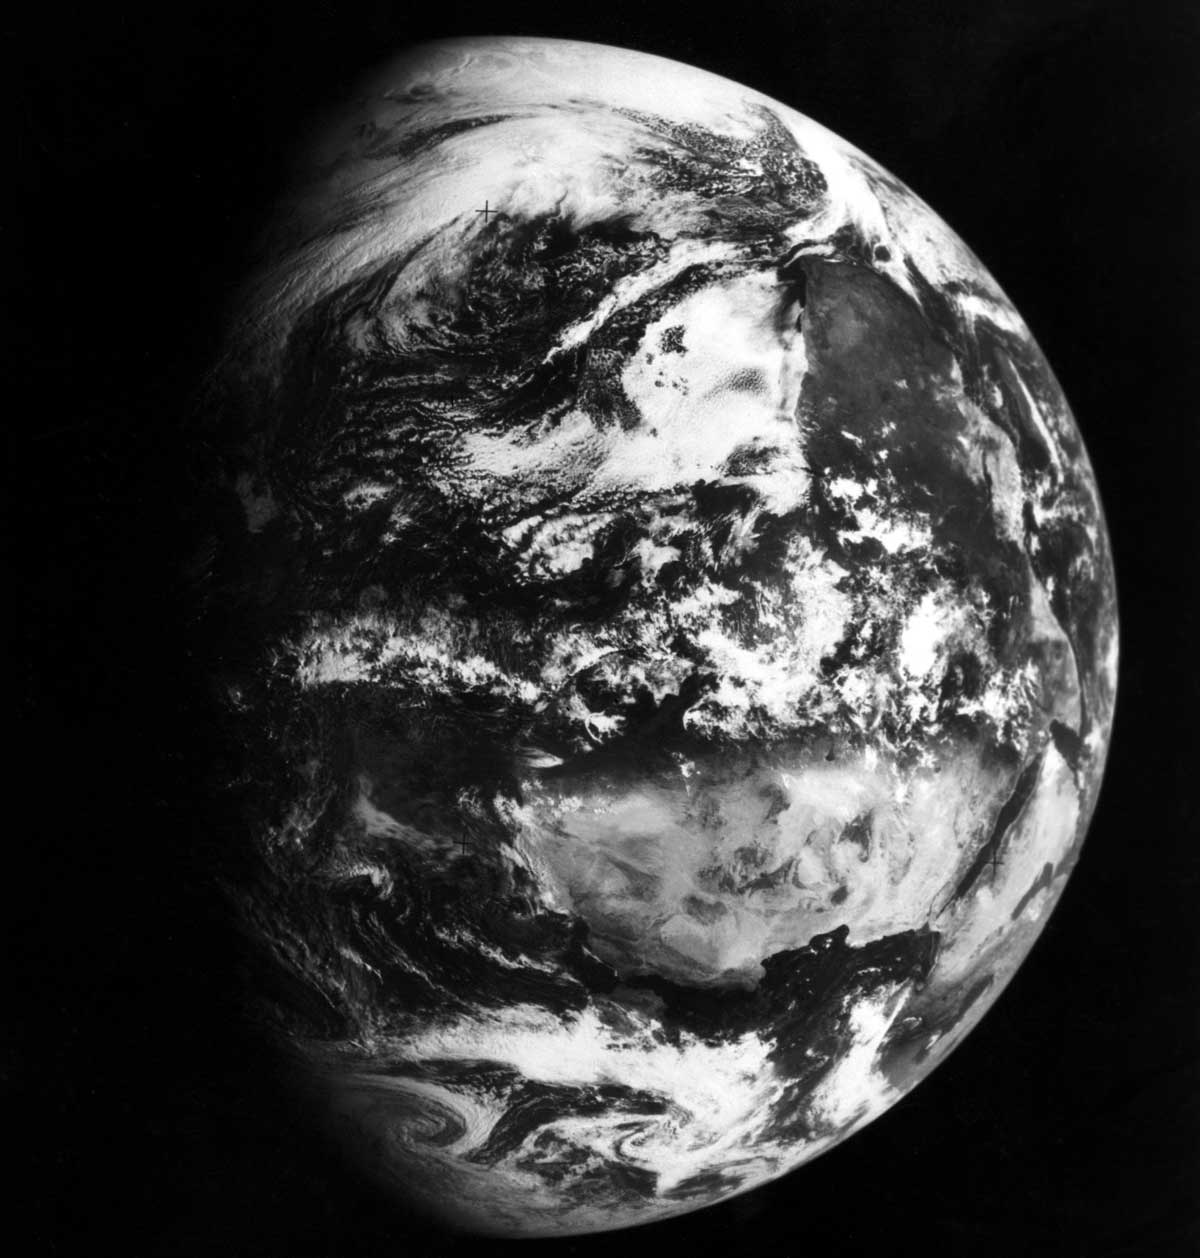 Photograph of Earth taken from the Zond 5 space probe, 21 September 1968. TASS/Topfoto.